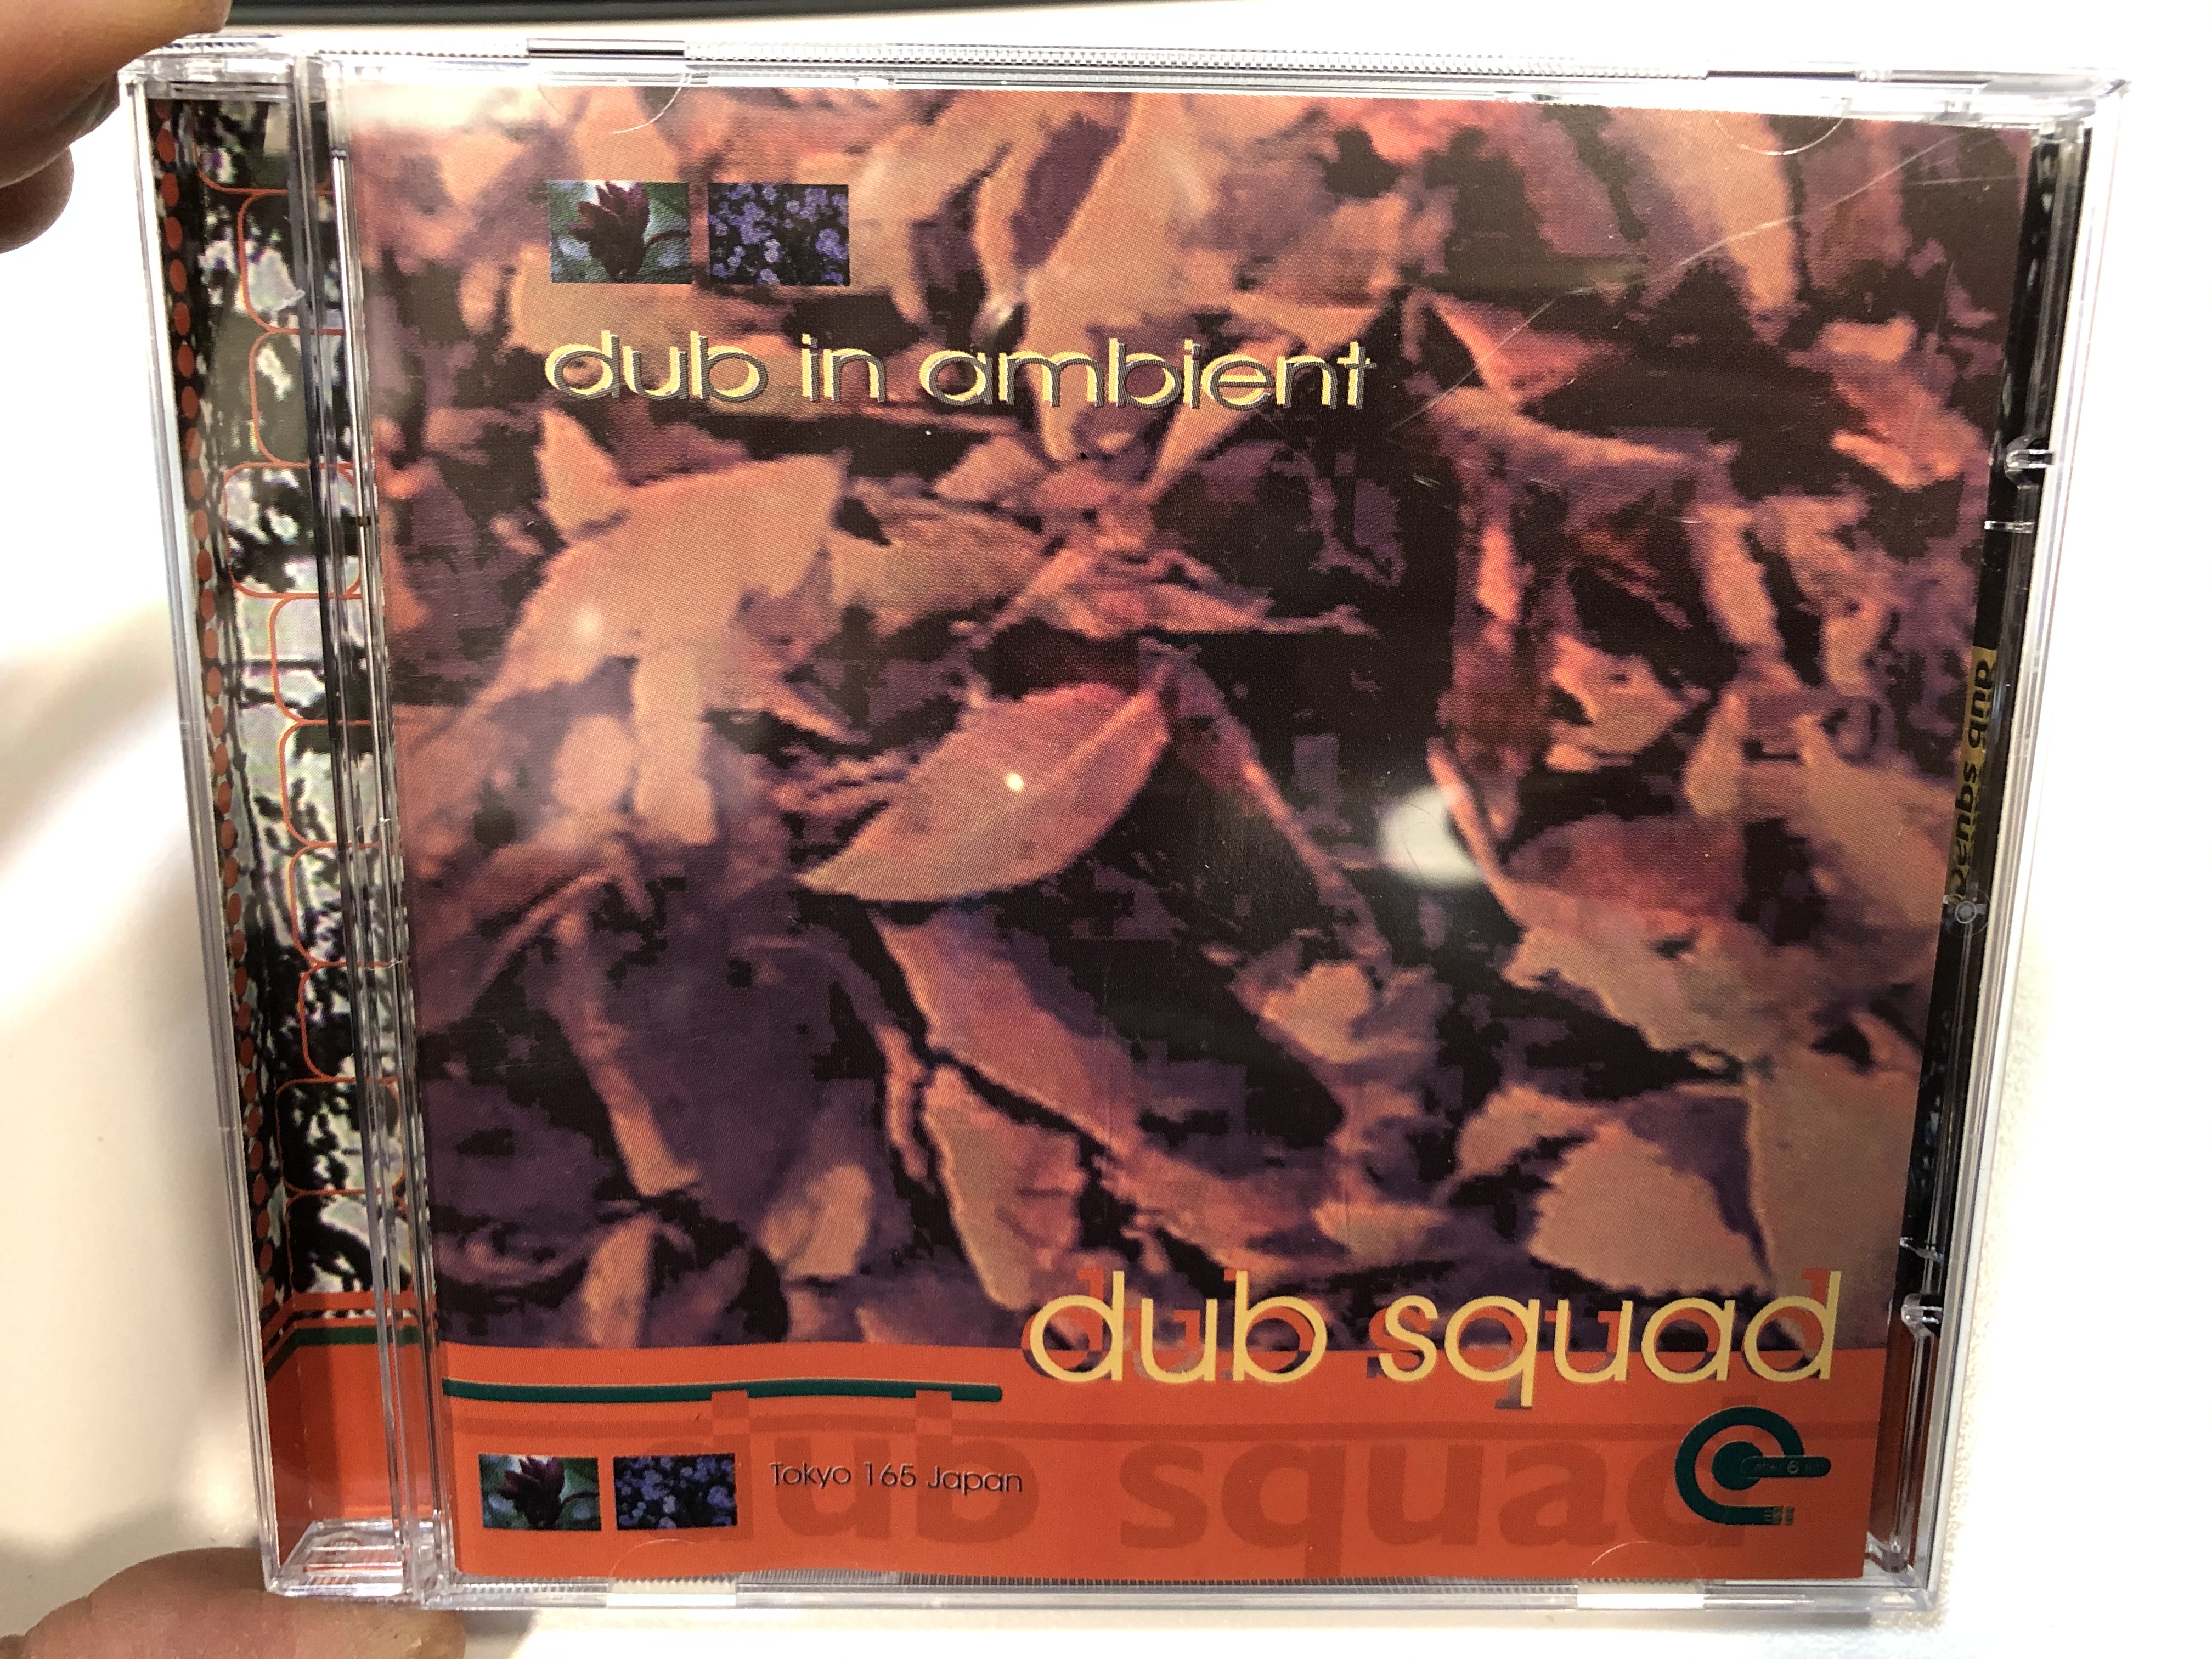 dub-in-ambient-dub-squad-after-6-am-audio-cd-1996-asa-20001-2-1-.jpg